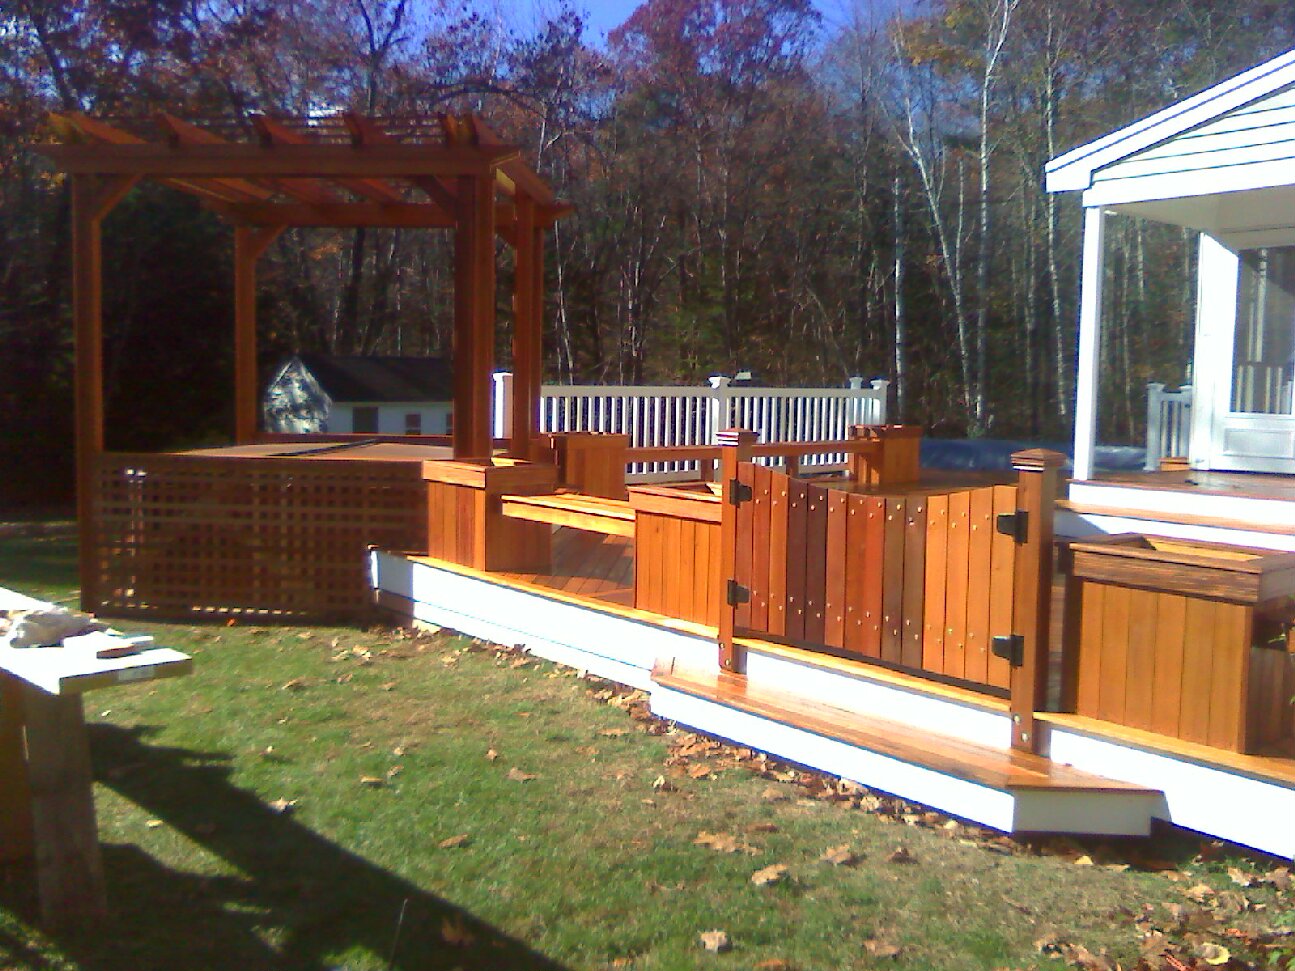 Mahogany Floor with Pergola and Hot Tub:  Vinyl Rails & Above Ground Pool;  Custom Benches, Flower Planters, & Gates (Townsend)